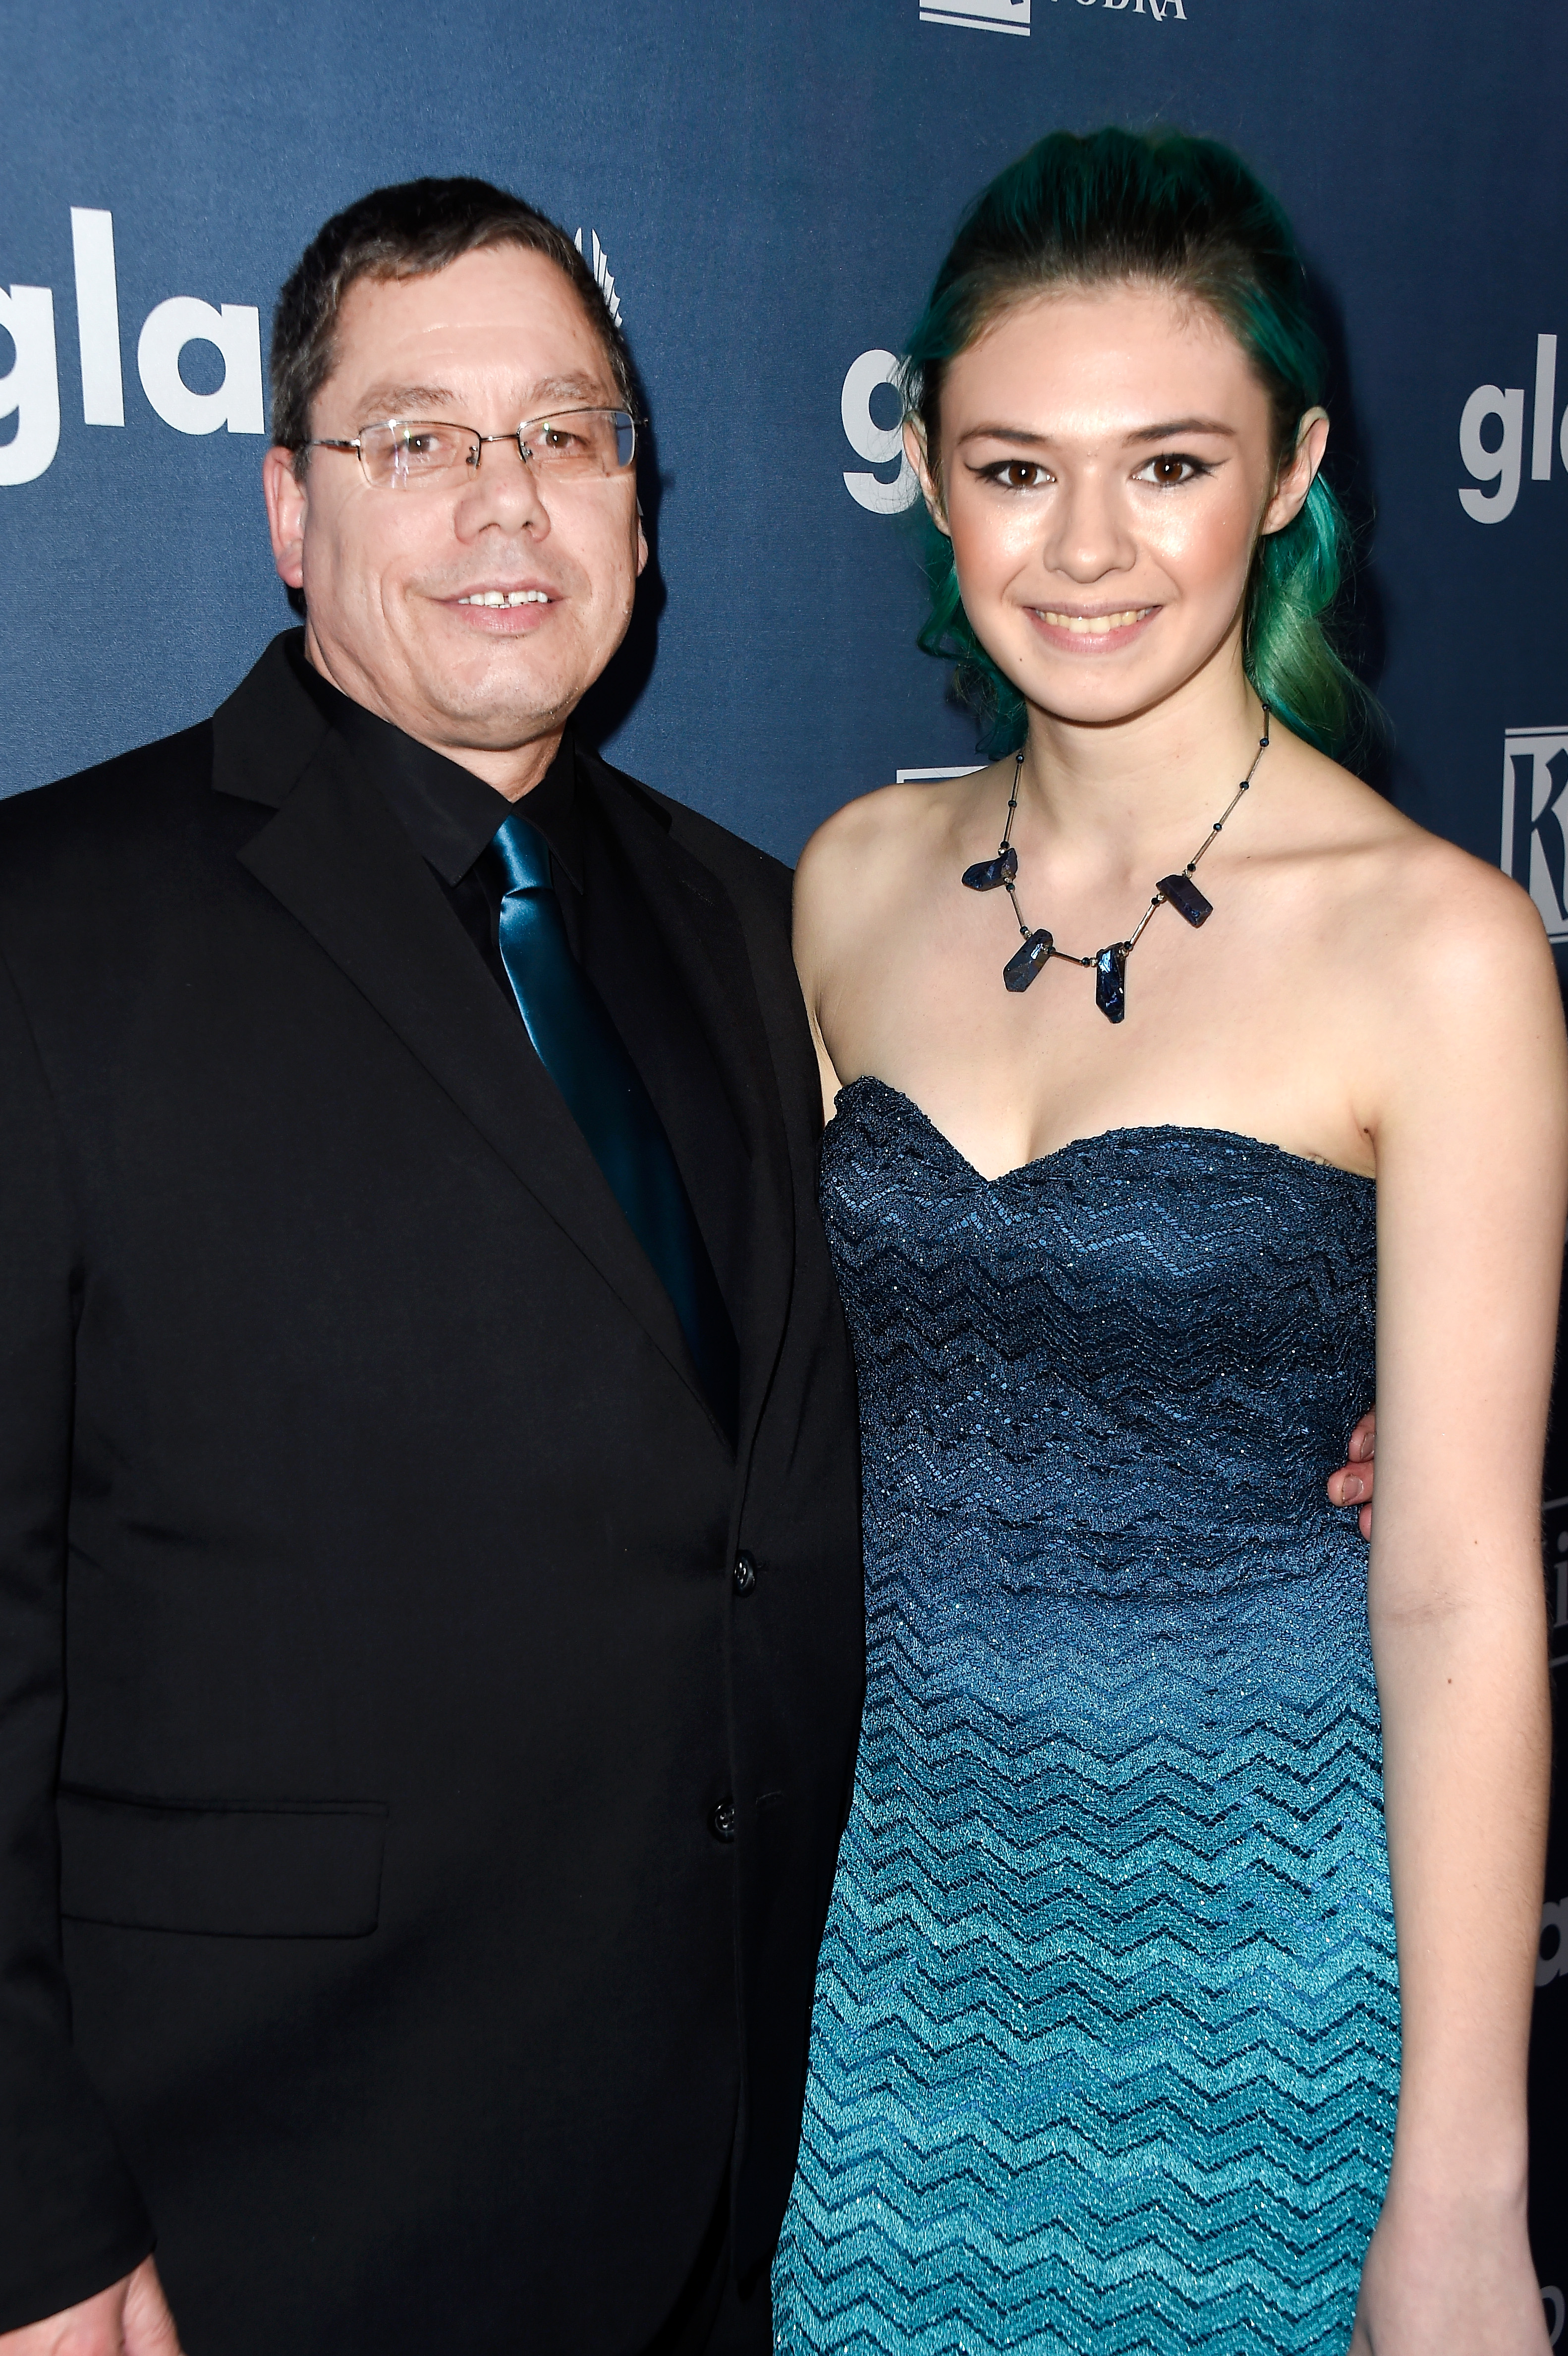 Actress Nicole Maines (R) and Wayne Maines attend the 27th Annual GLAAD Media Awards at the Beverly Hilton Hotel in Beverly Hills, Calif., on April 2, 2016.